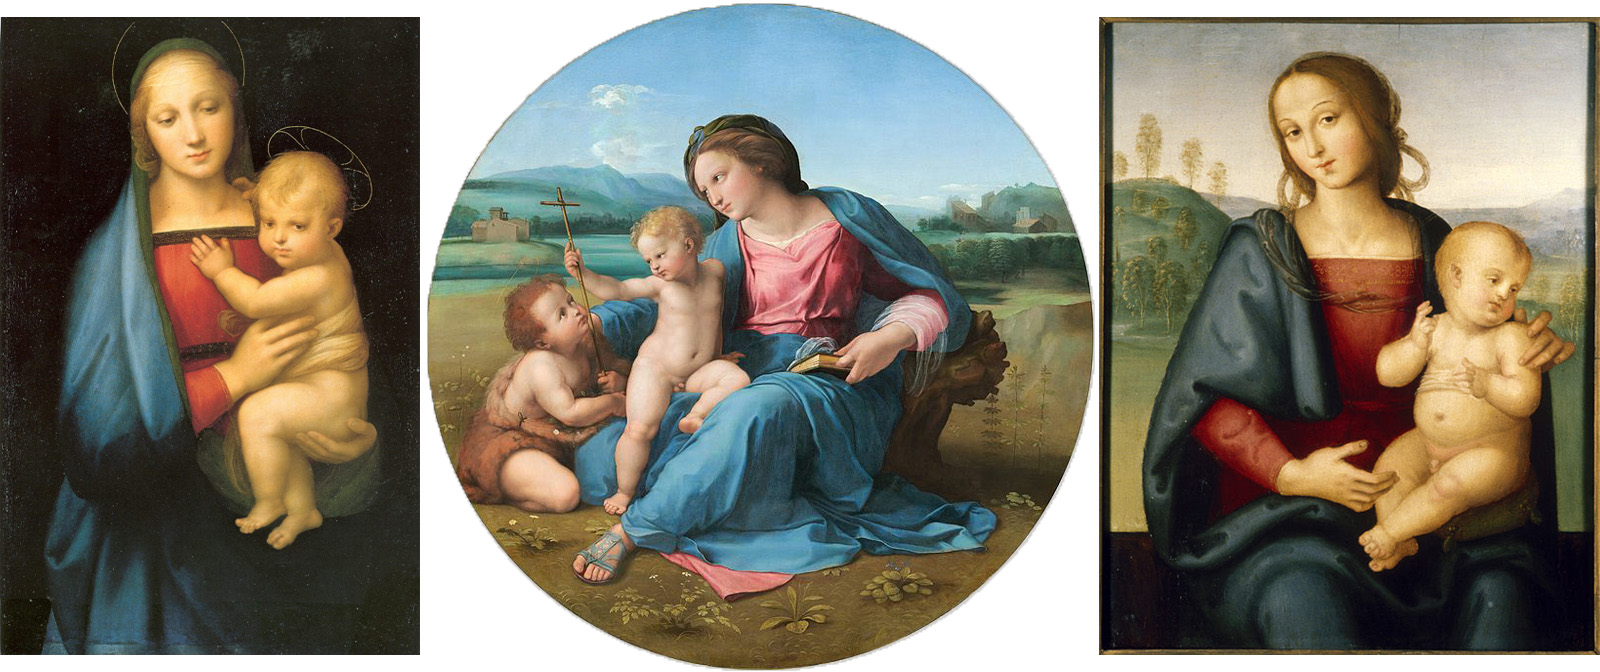 Beneficence and depravity in a painting by Raphael Santi and his stunning Madonnas that not everyone knows about.